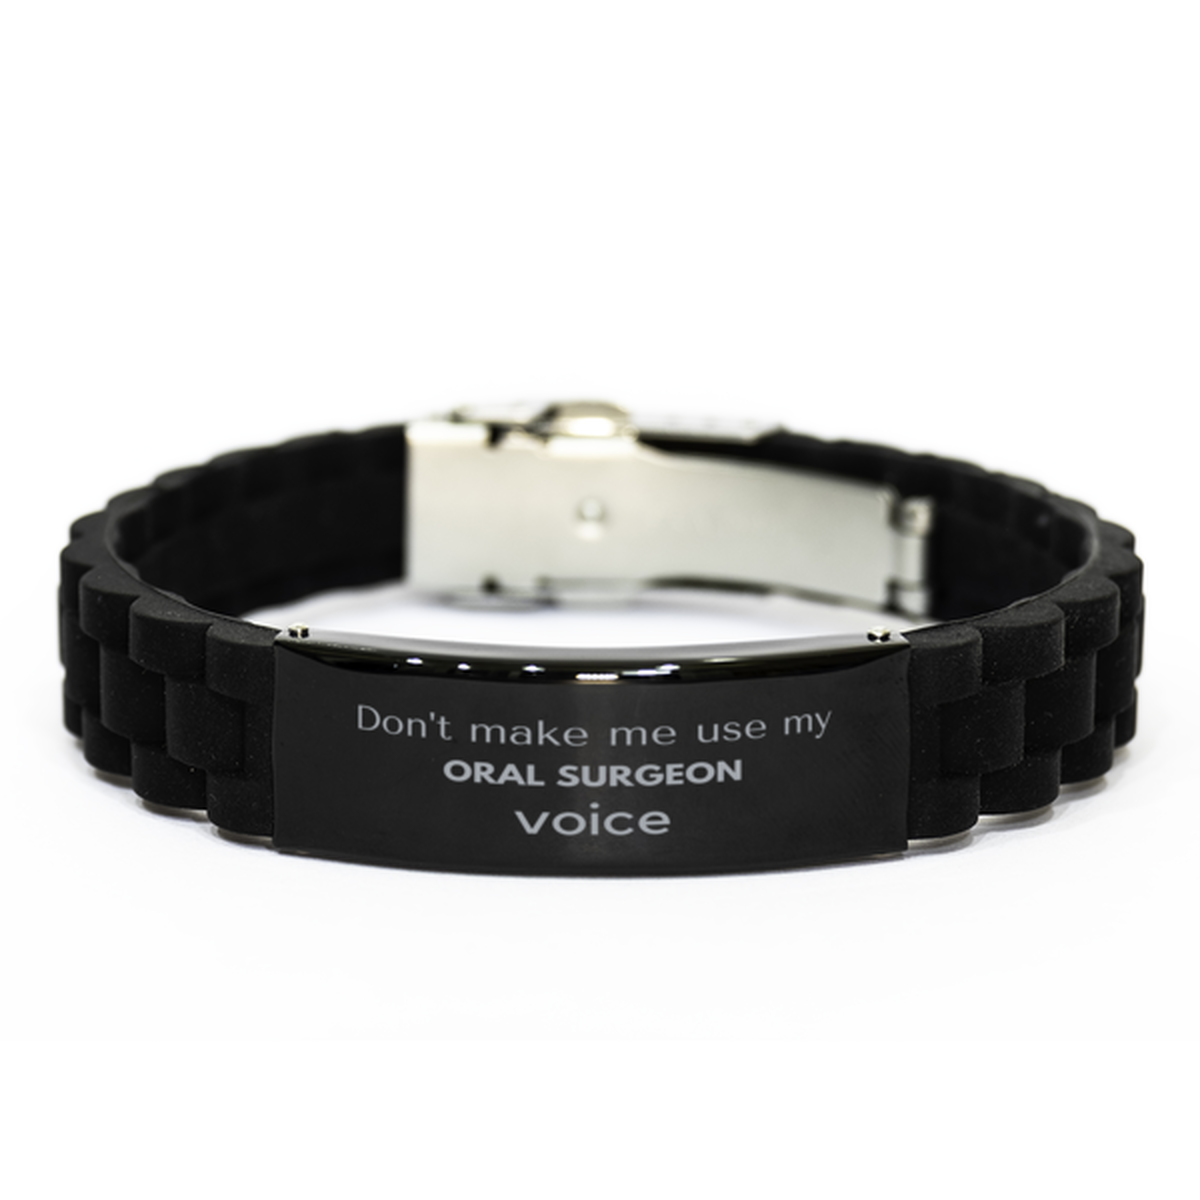 Don't make me use my Oral Surgeon voice, Sarcasm Oral Surgeon Gifts, Christmas Oral Surgeon Black Glidelock Clasp Bracelet Birthday Unique Gifts For Oral Surgeon Coworkers, Men, Women, Colleague, Friends